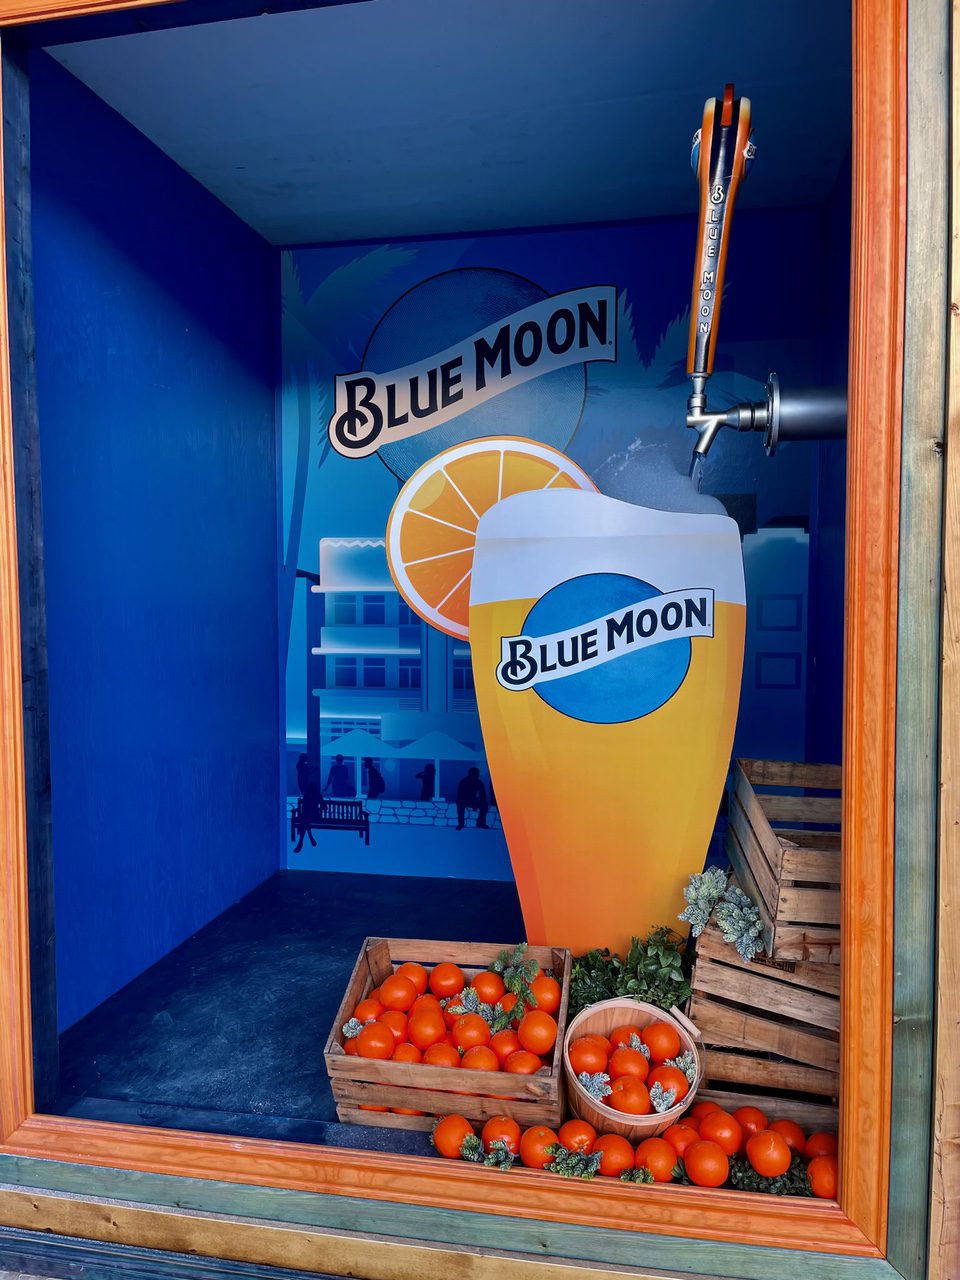 blue moon logo and vegetables